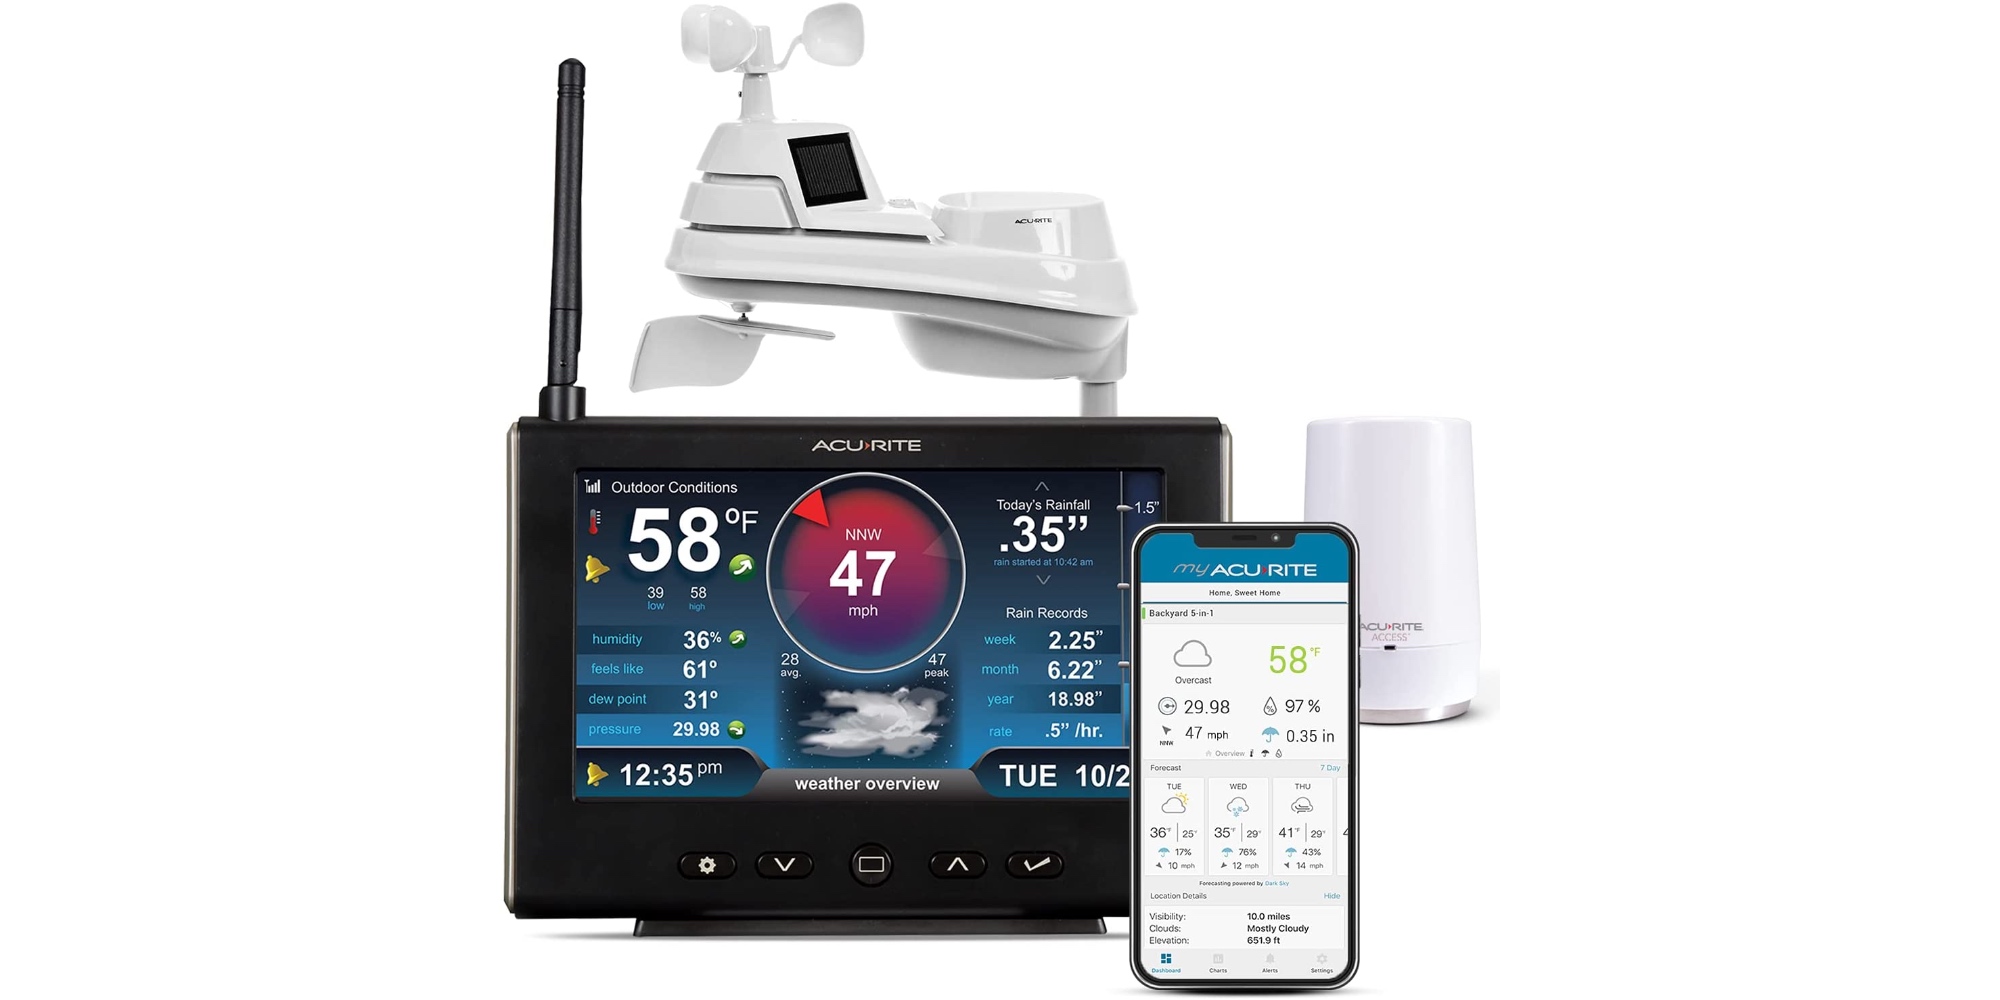 AcuRite Iris (5-in-1) Wireless Weather Station with Remote